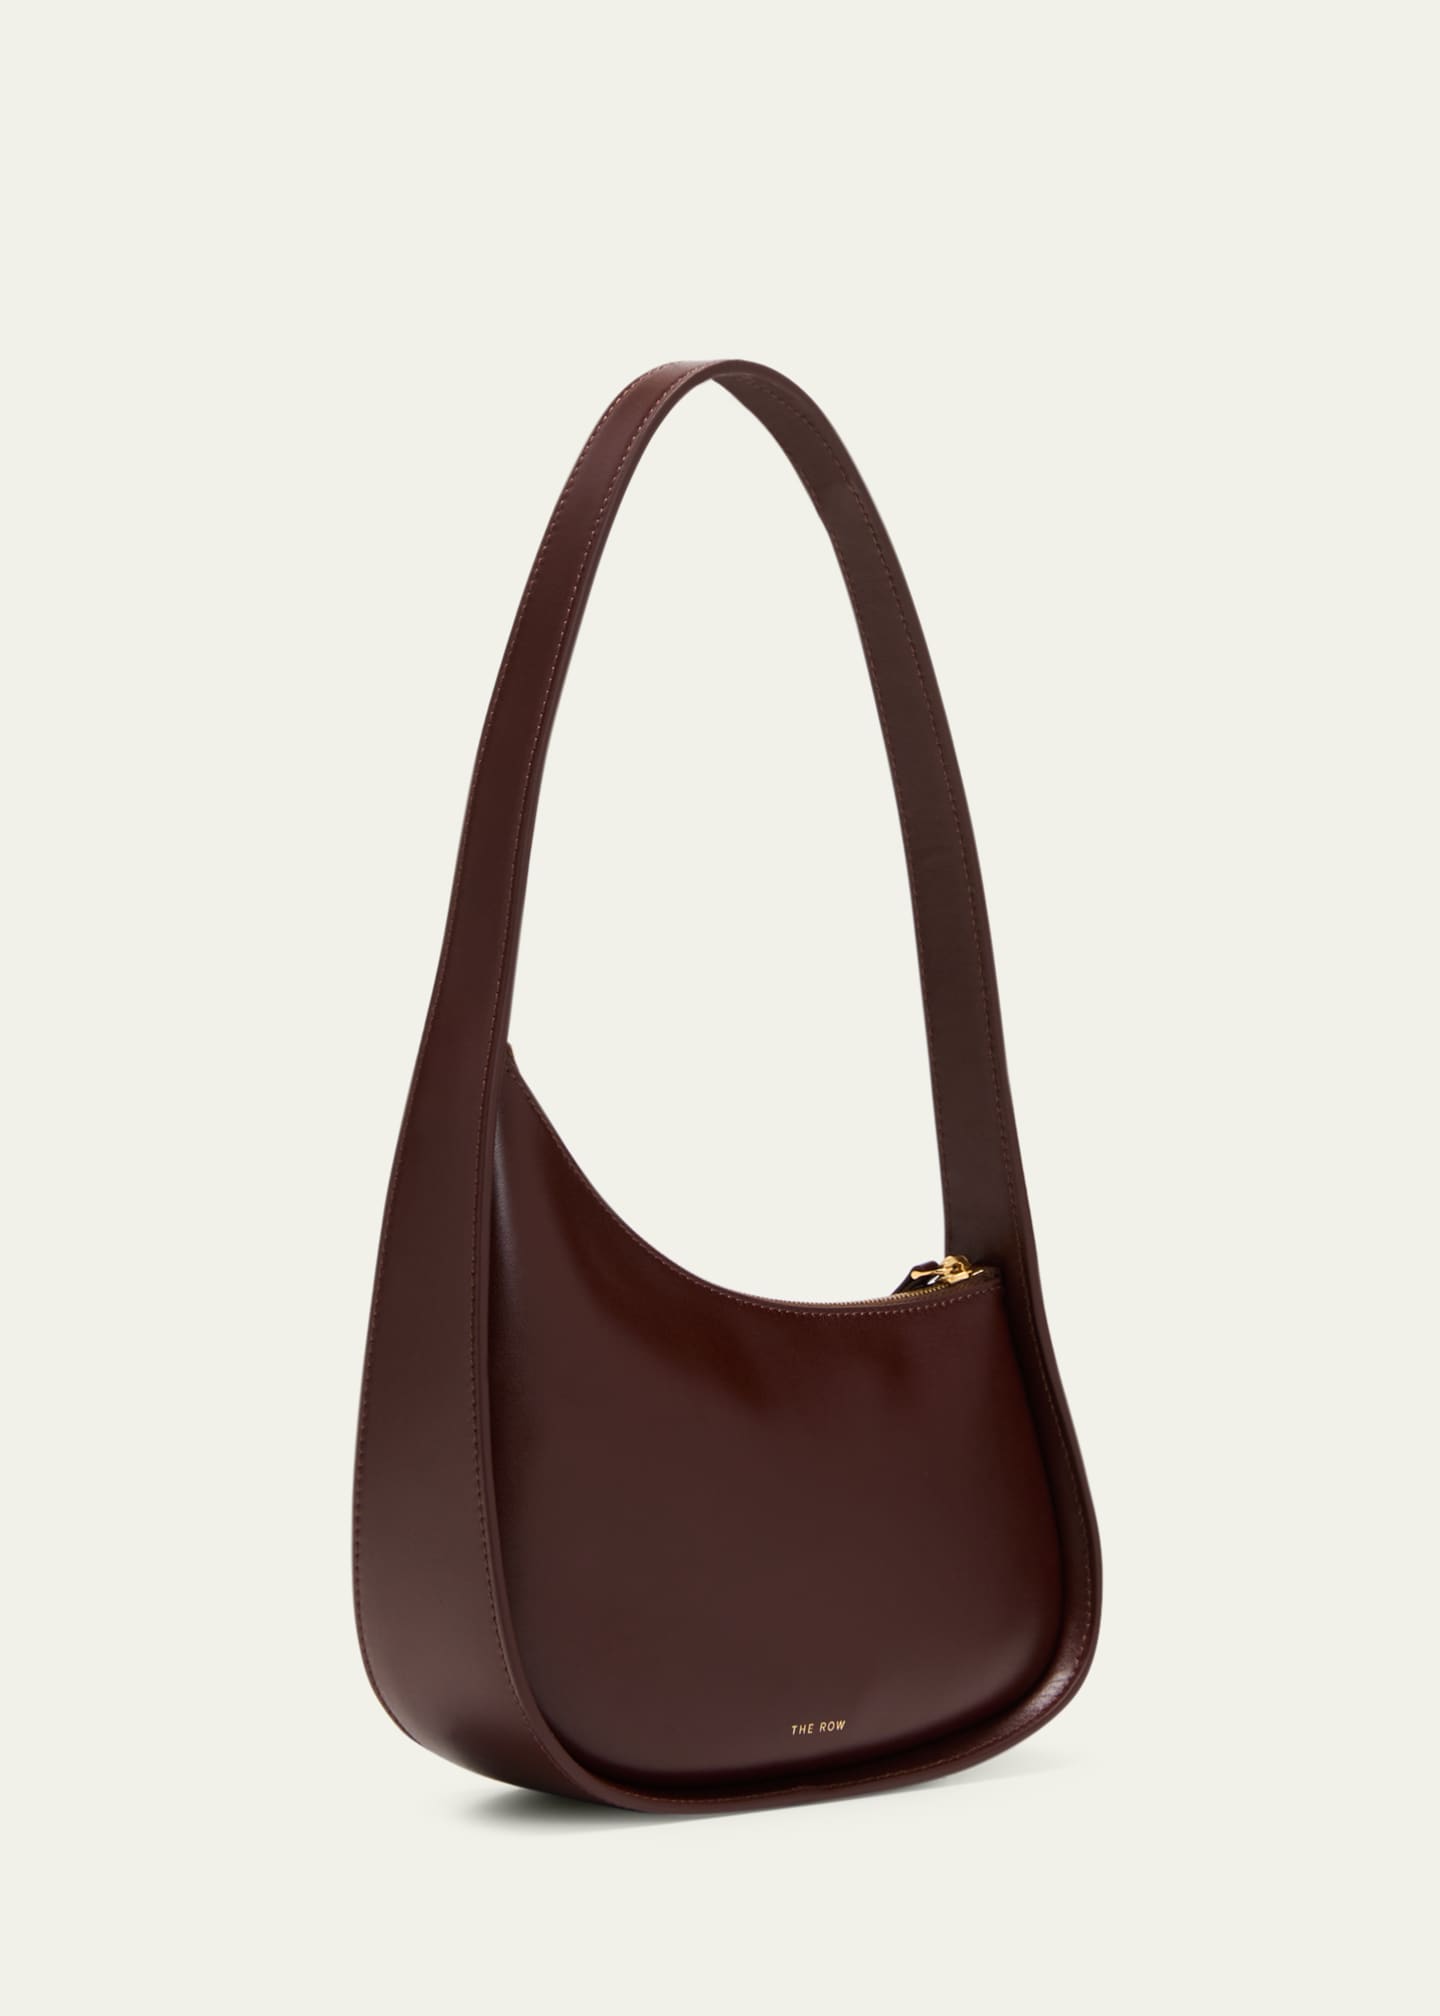 Half Moon Leather Shoulder Bag in Brown - The Row